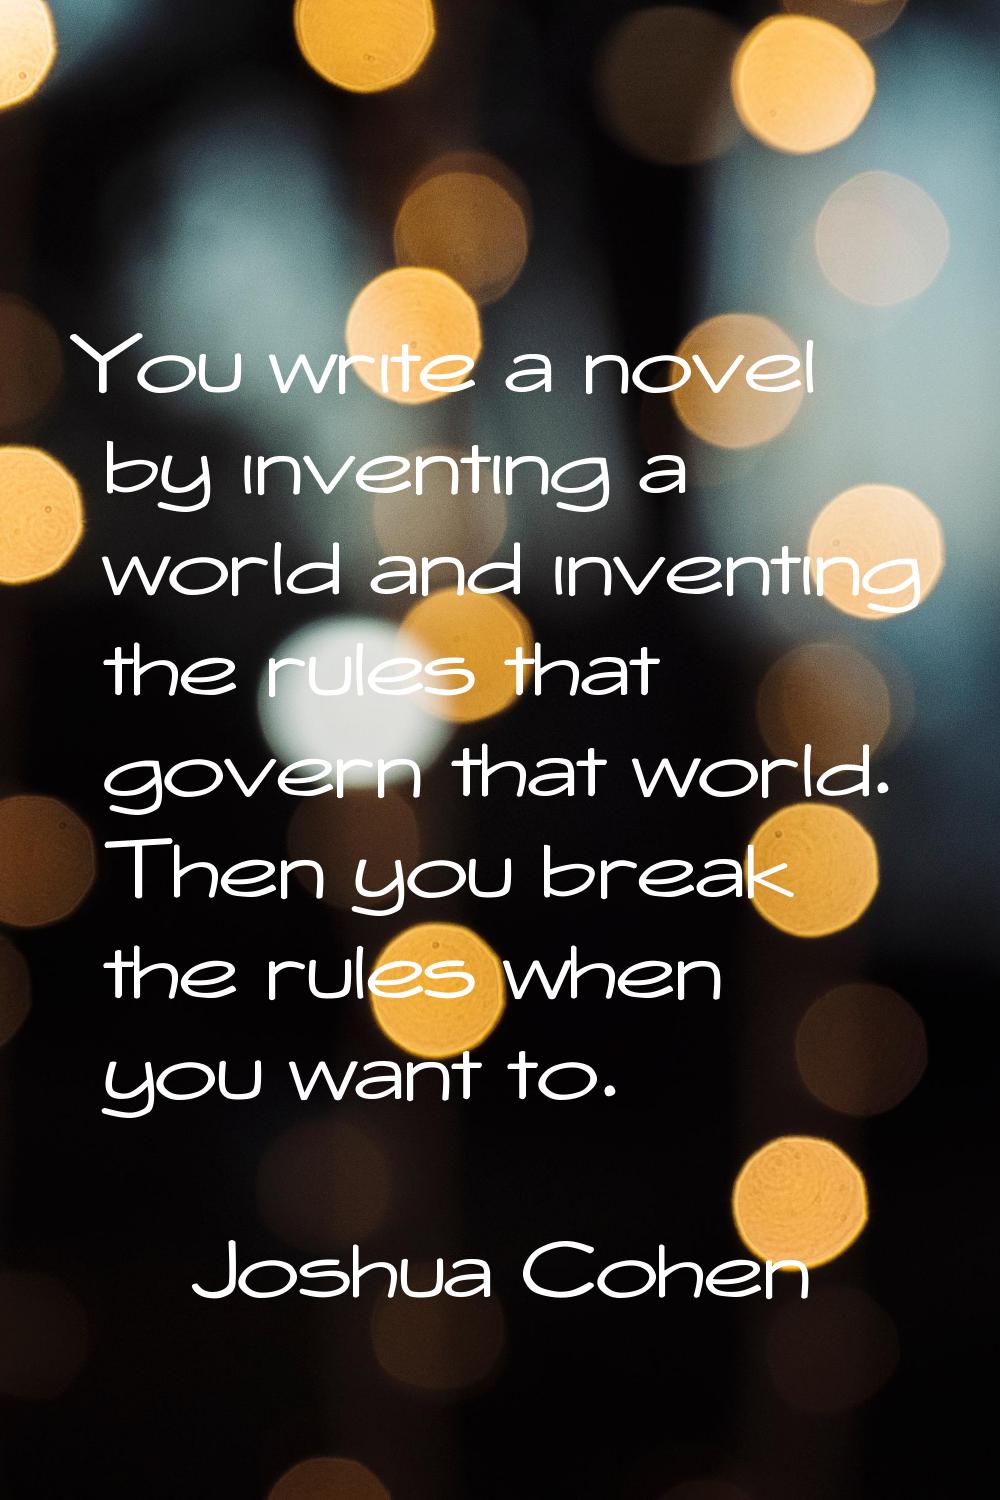 You write a novel by inventing a world and inventing the rules that govern that world. Then you bre